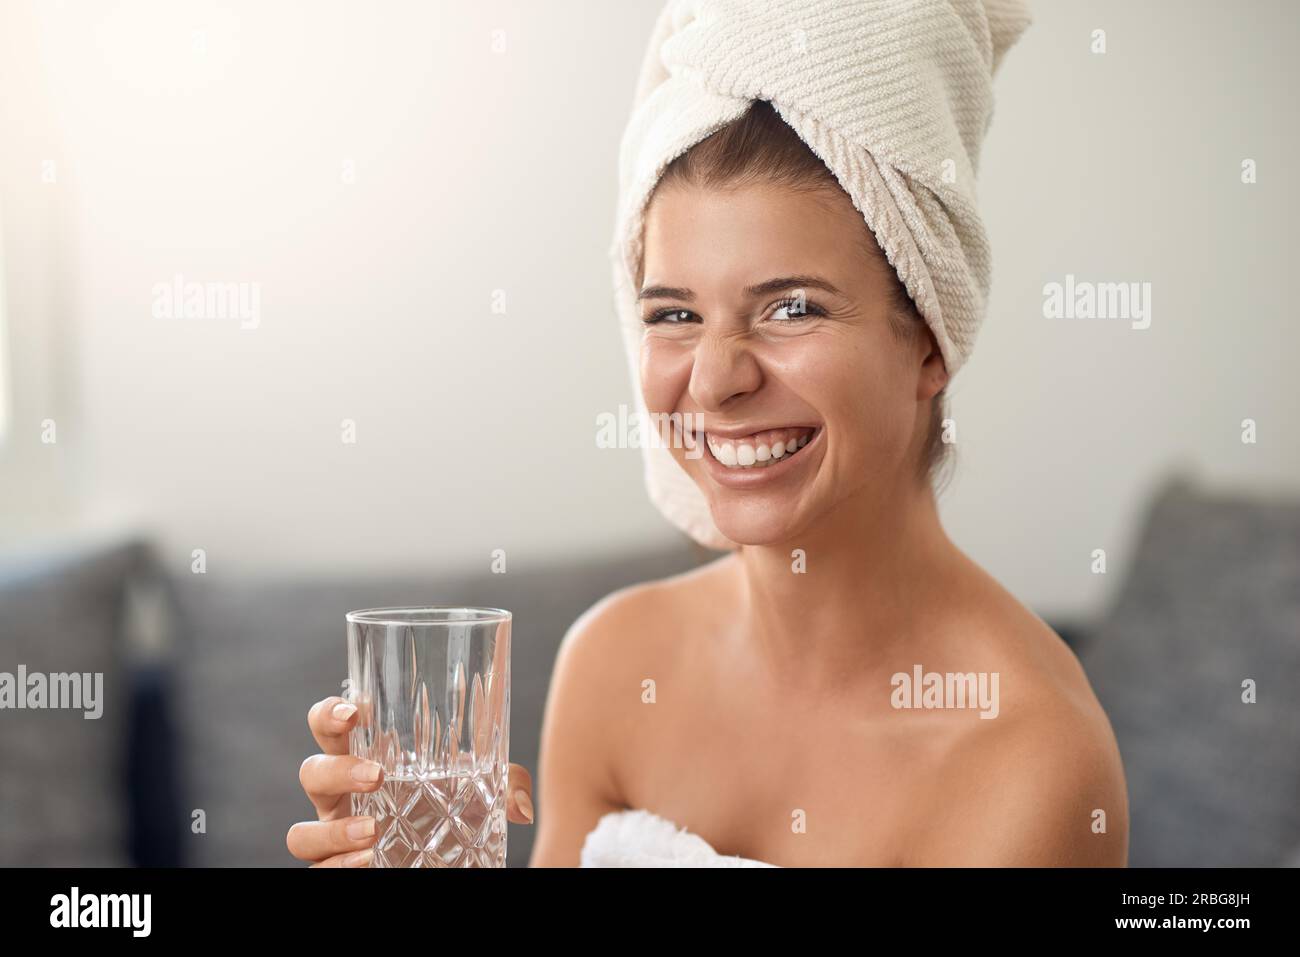 Happy attractive young woman with a cute friendly grin wearing a clean white towel around her hair holding a glass of pure fresh water laughing at Stock Photo